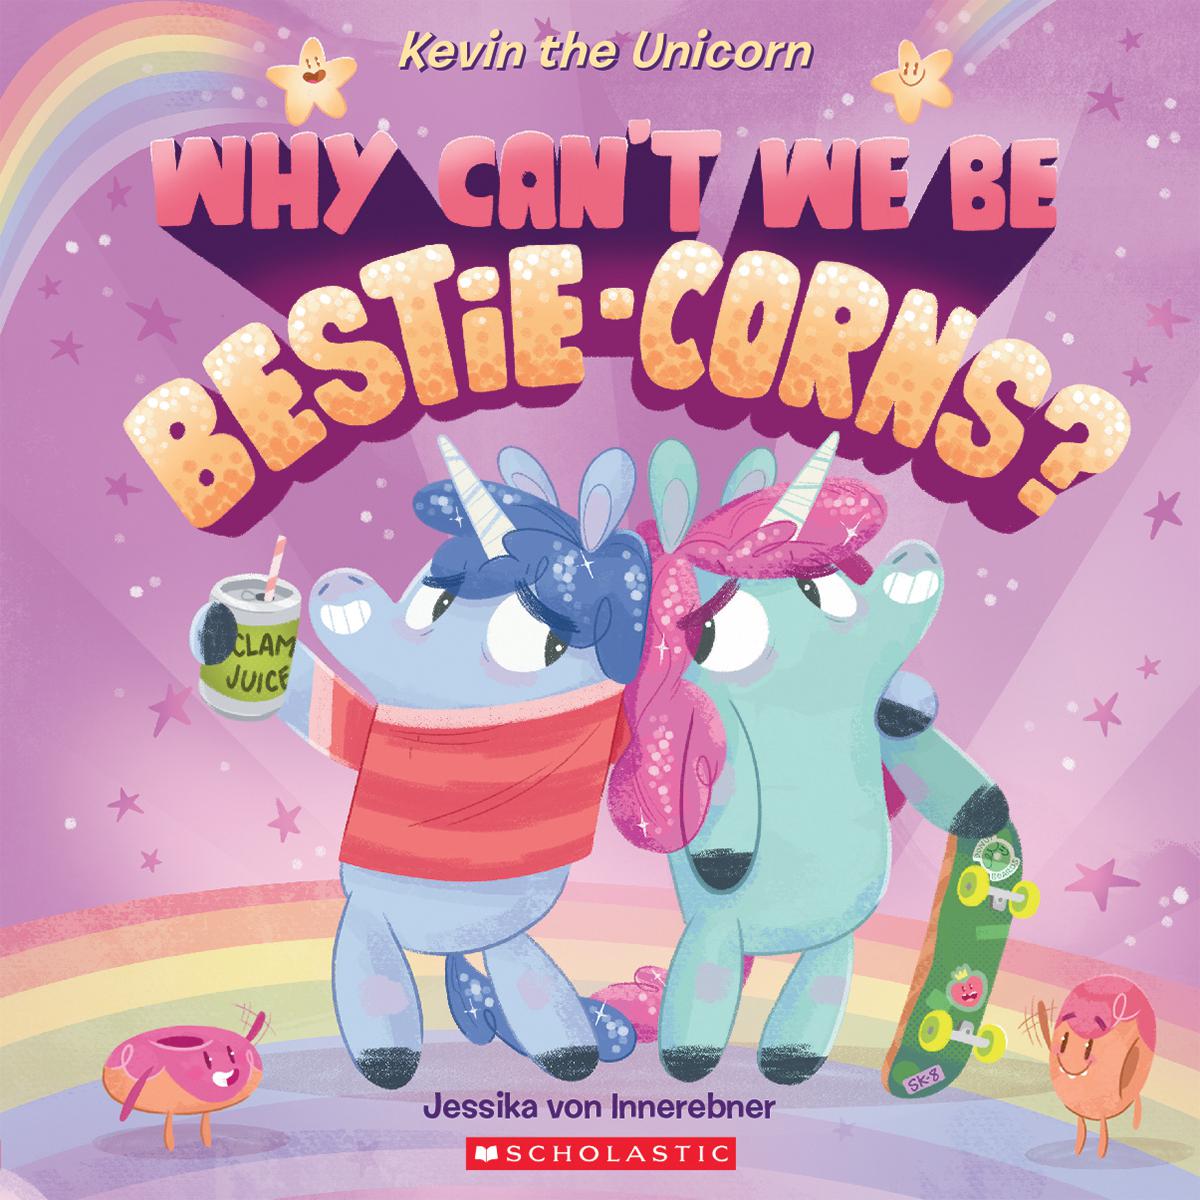  Kevin the Unicorn: Why Can't We Be Bestie-Corns? 